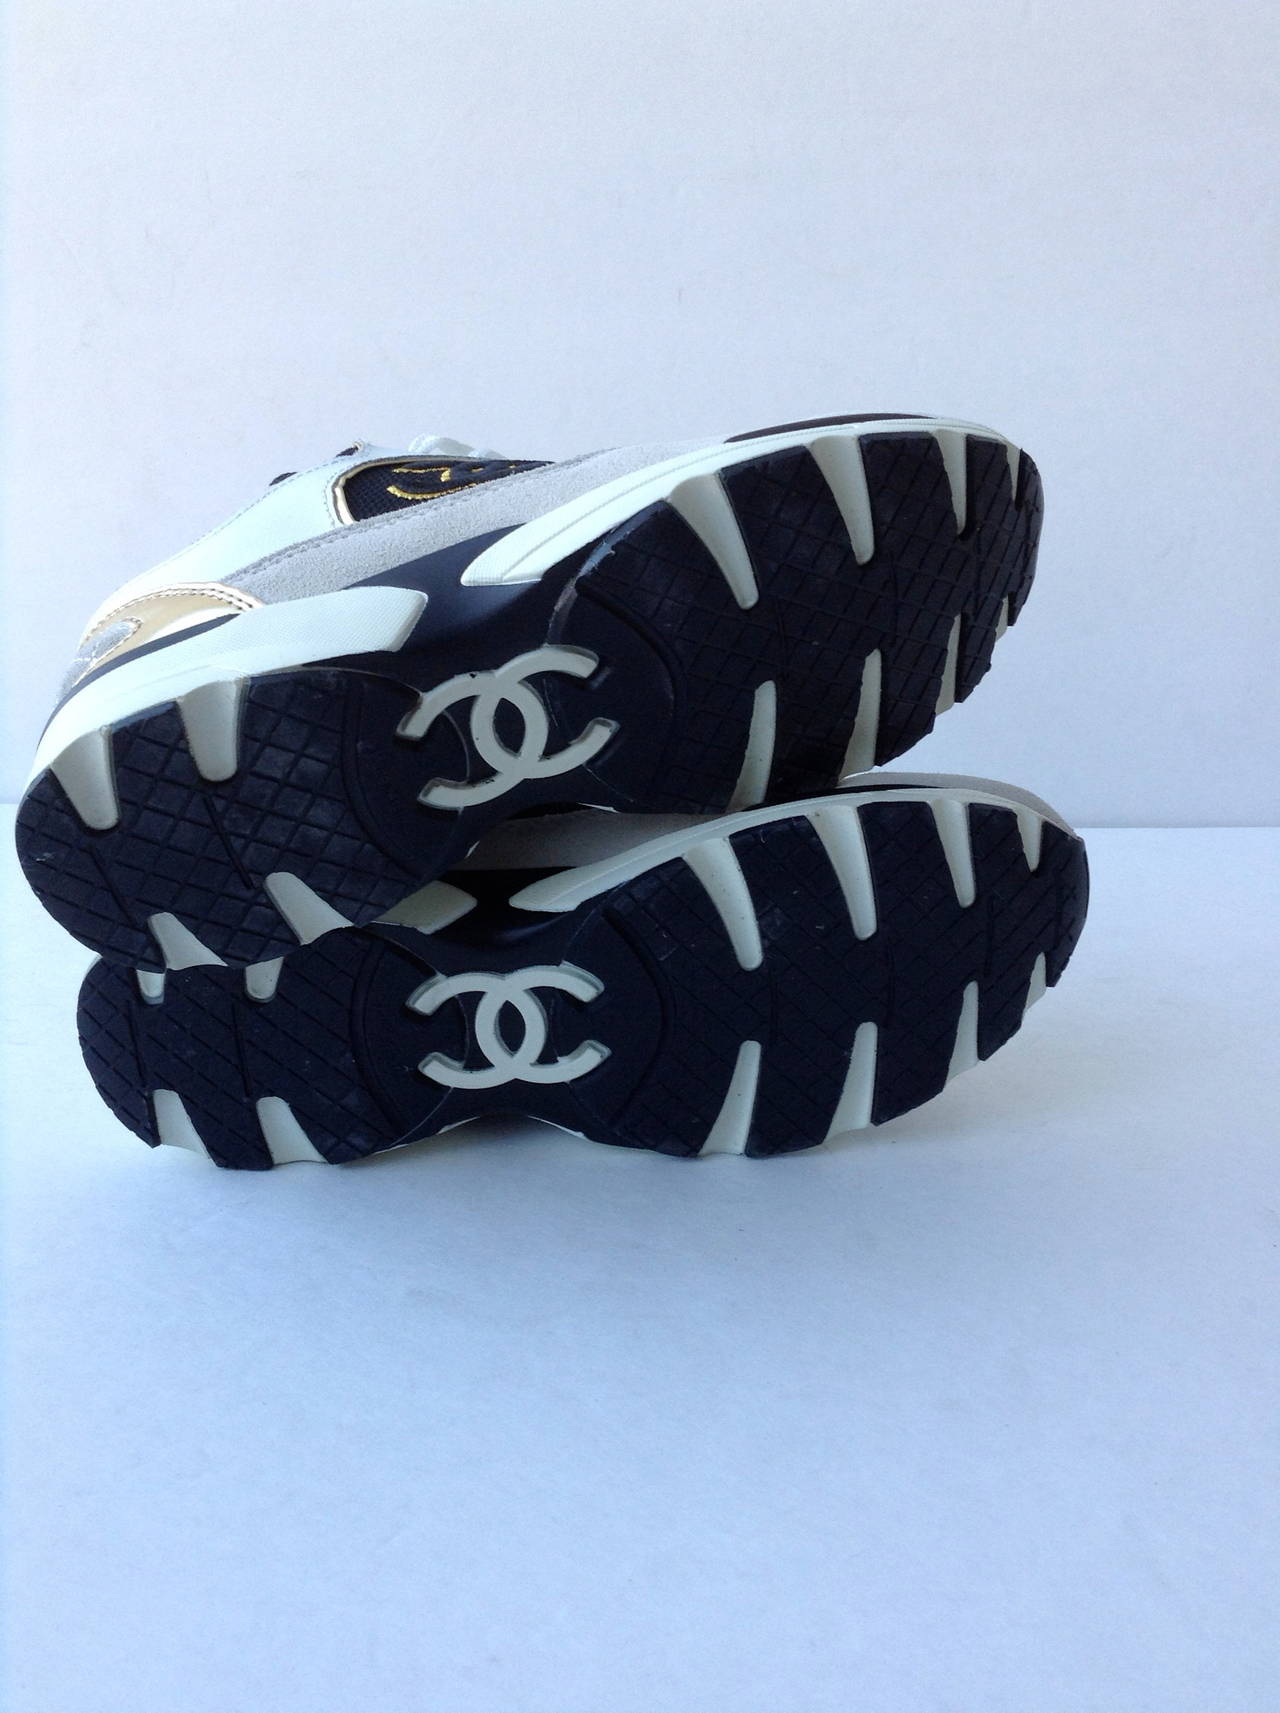 2011/2012 Cruise Chanel Sneakers In Excellent Condition For Sale In Westmount, Quebec